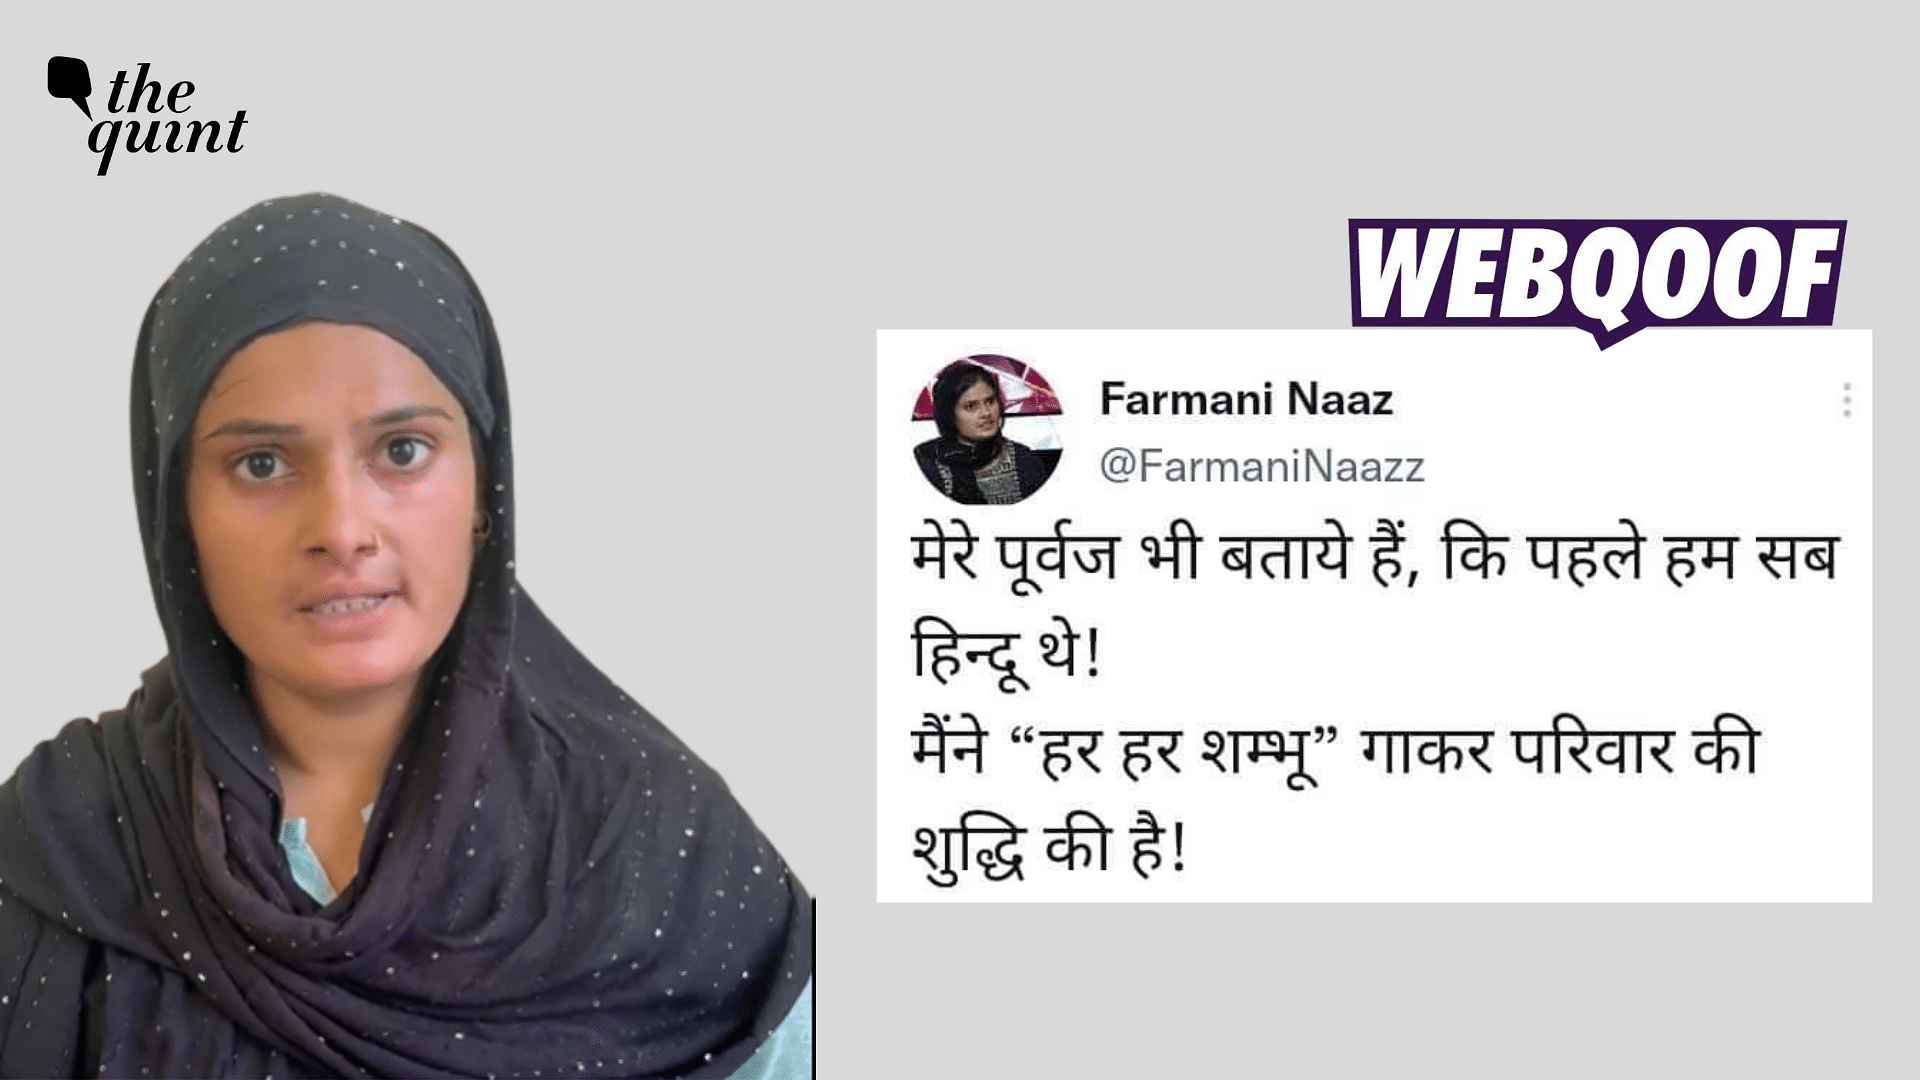 <div class="paragraphs"><p>Fact-check: The claim states that Farmani Naaz tweeted about her ancestors being Hindu.</p></div>